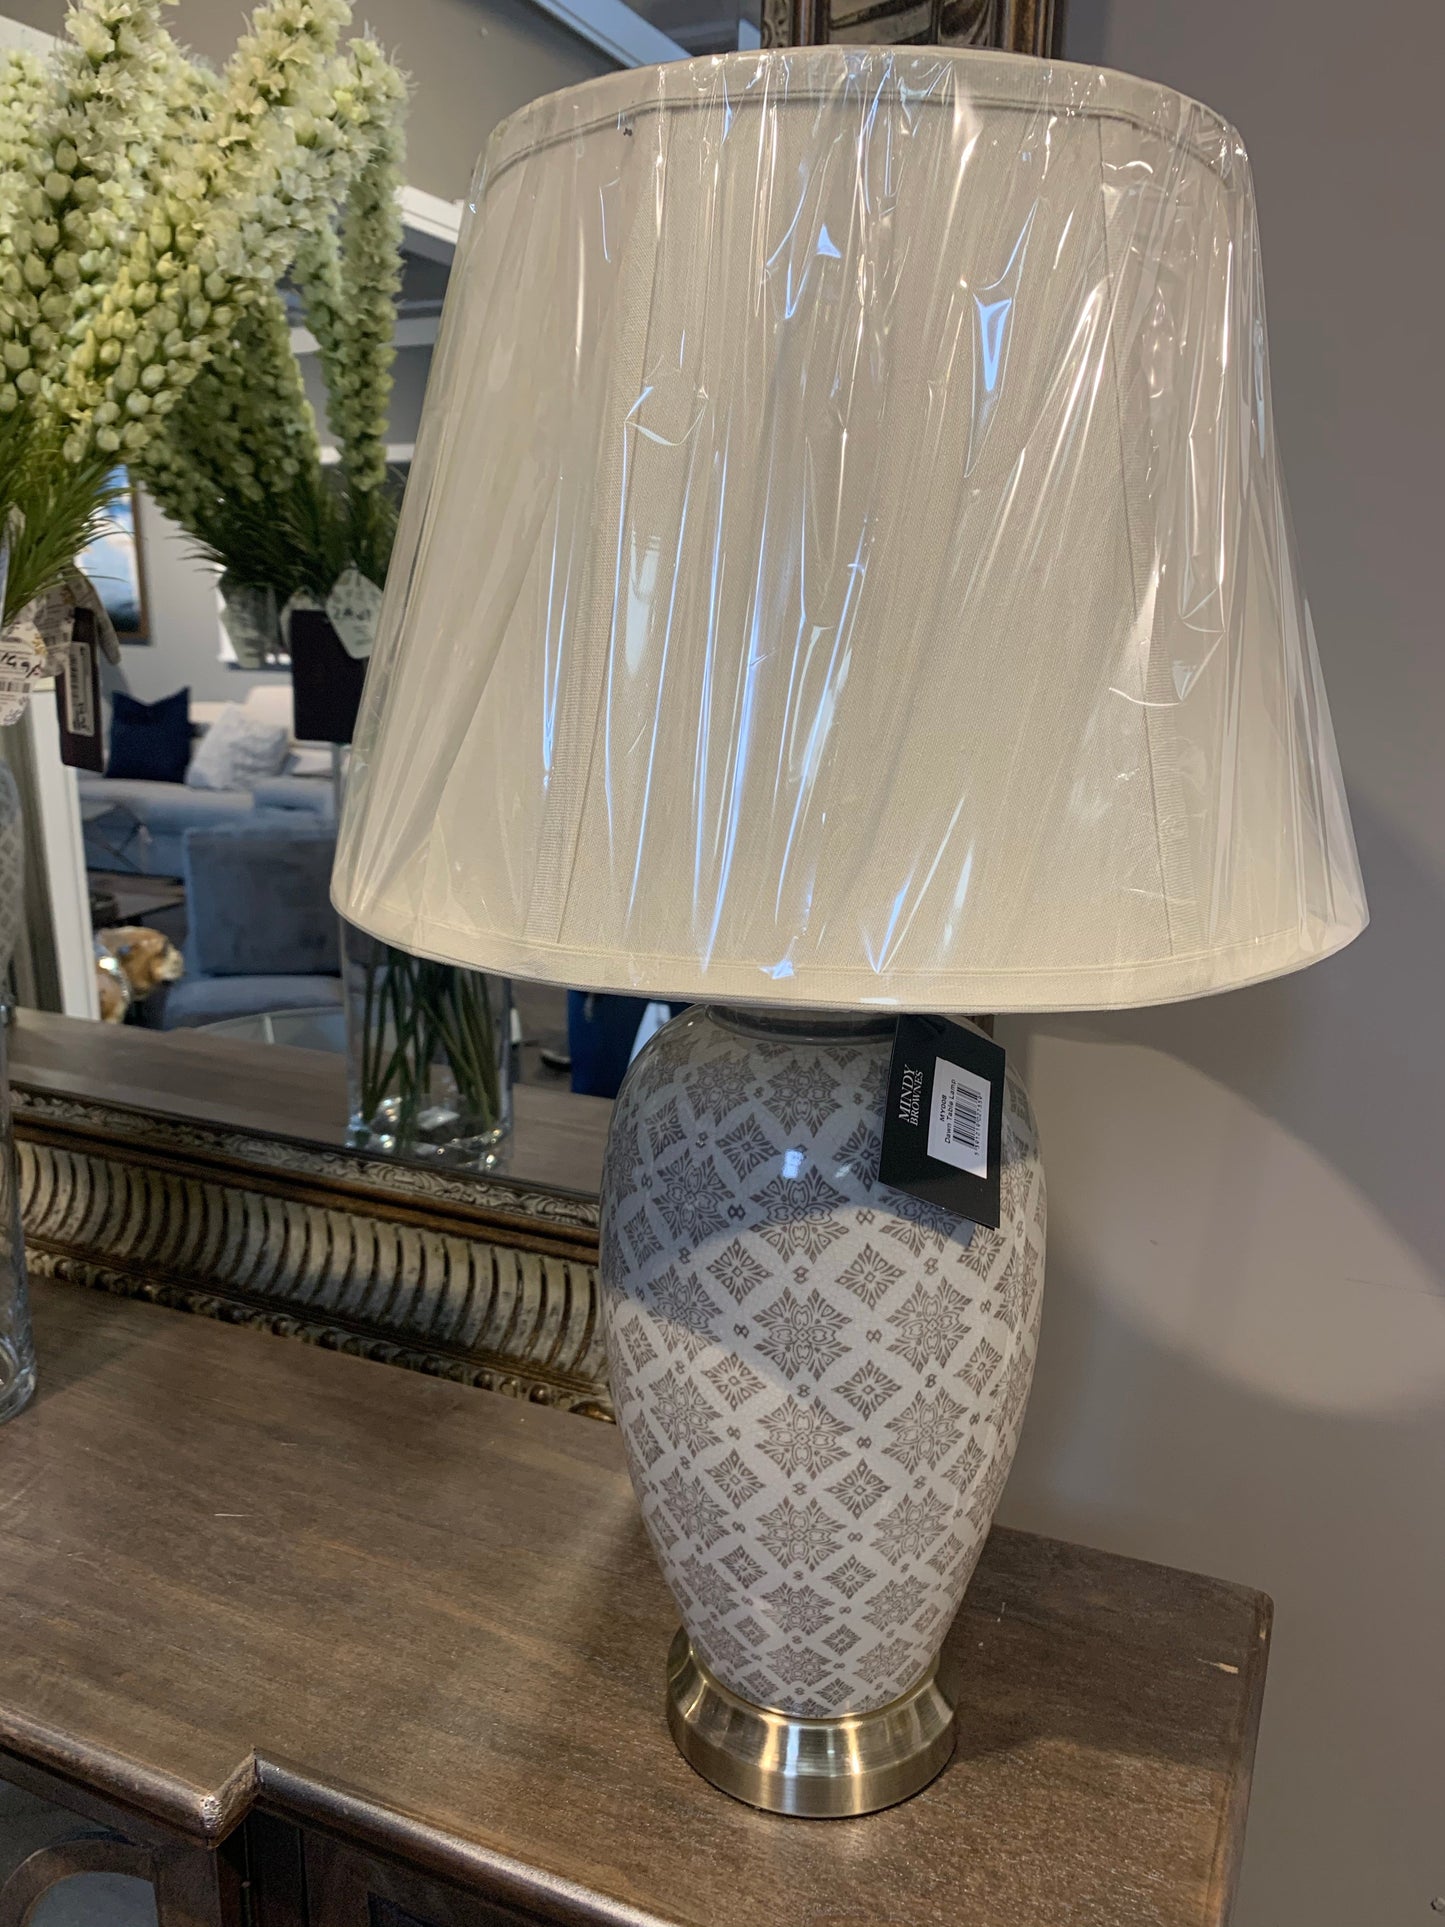 Dawn glazed ceramic table lamp with shade instore purchase last one